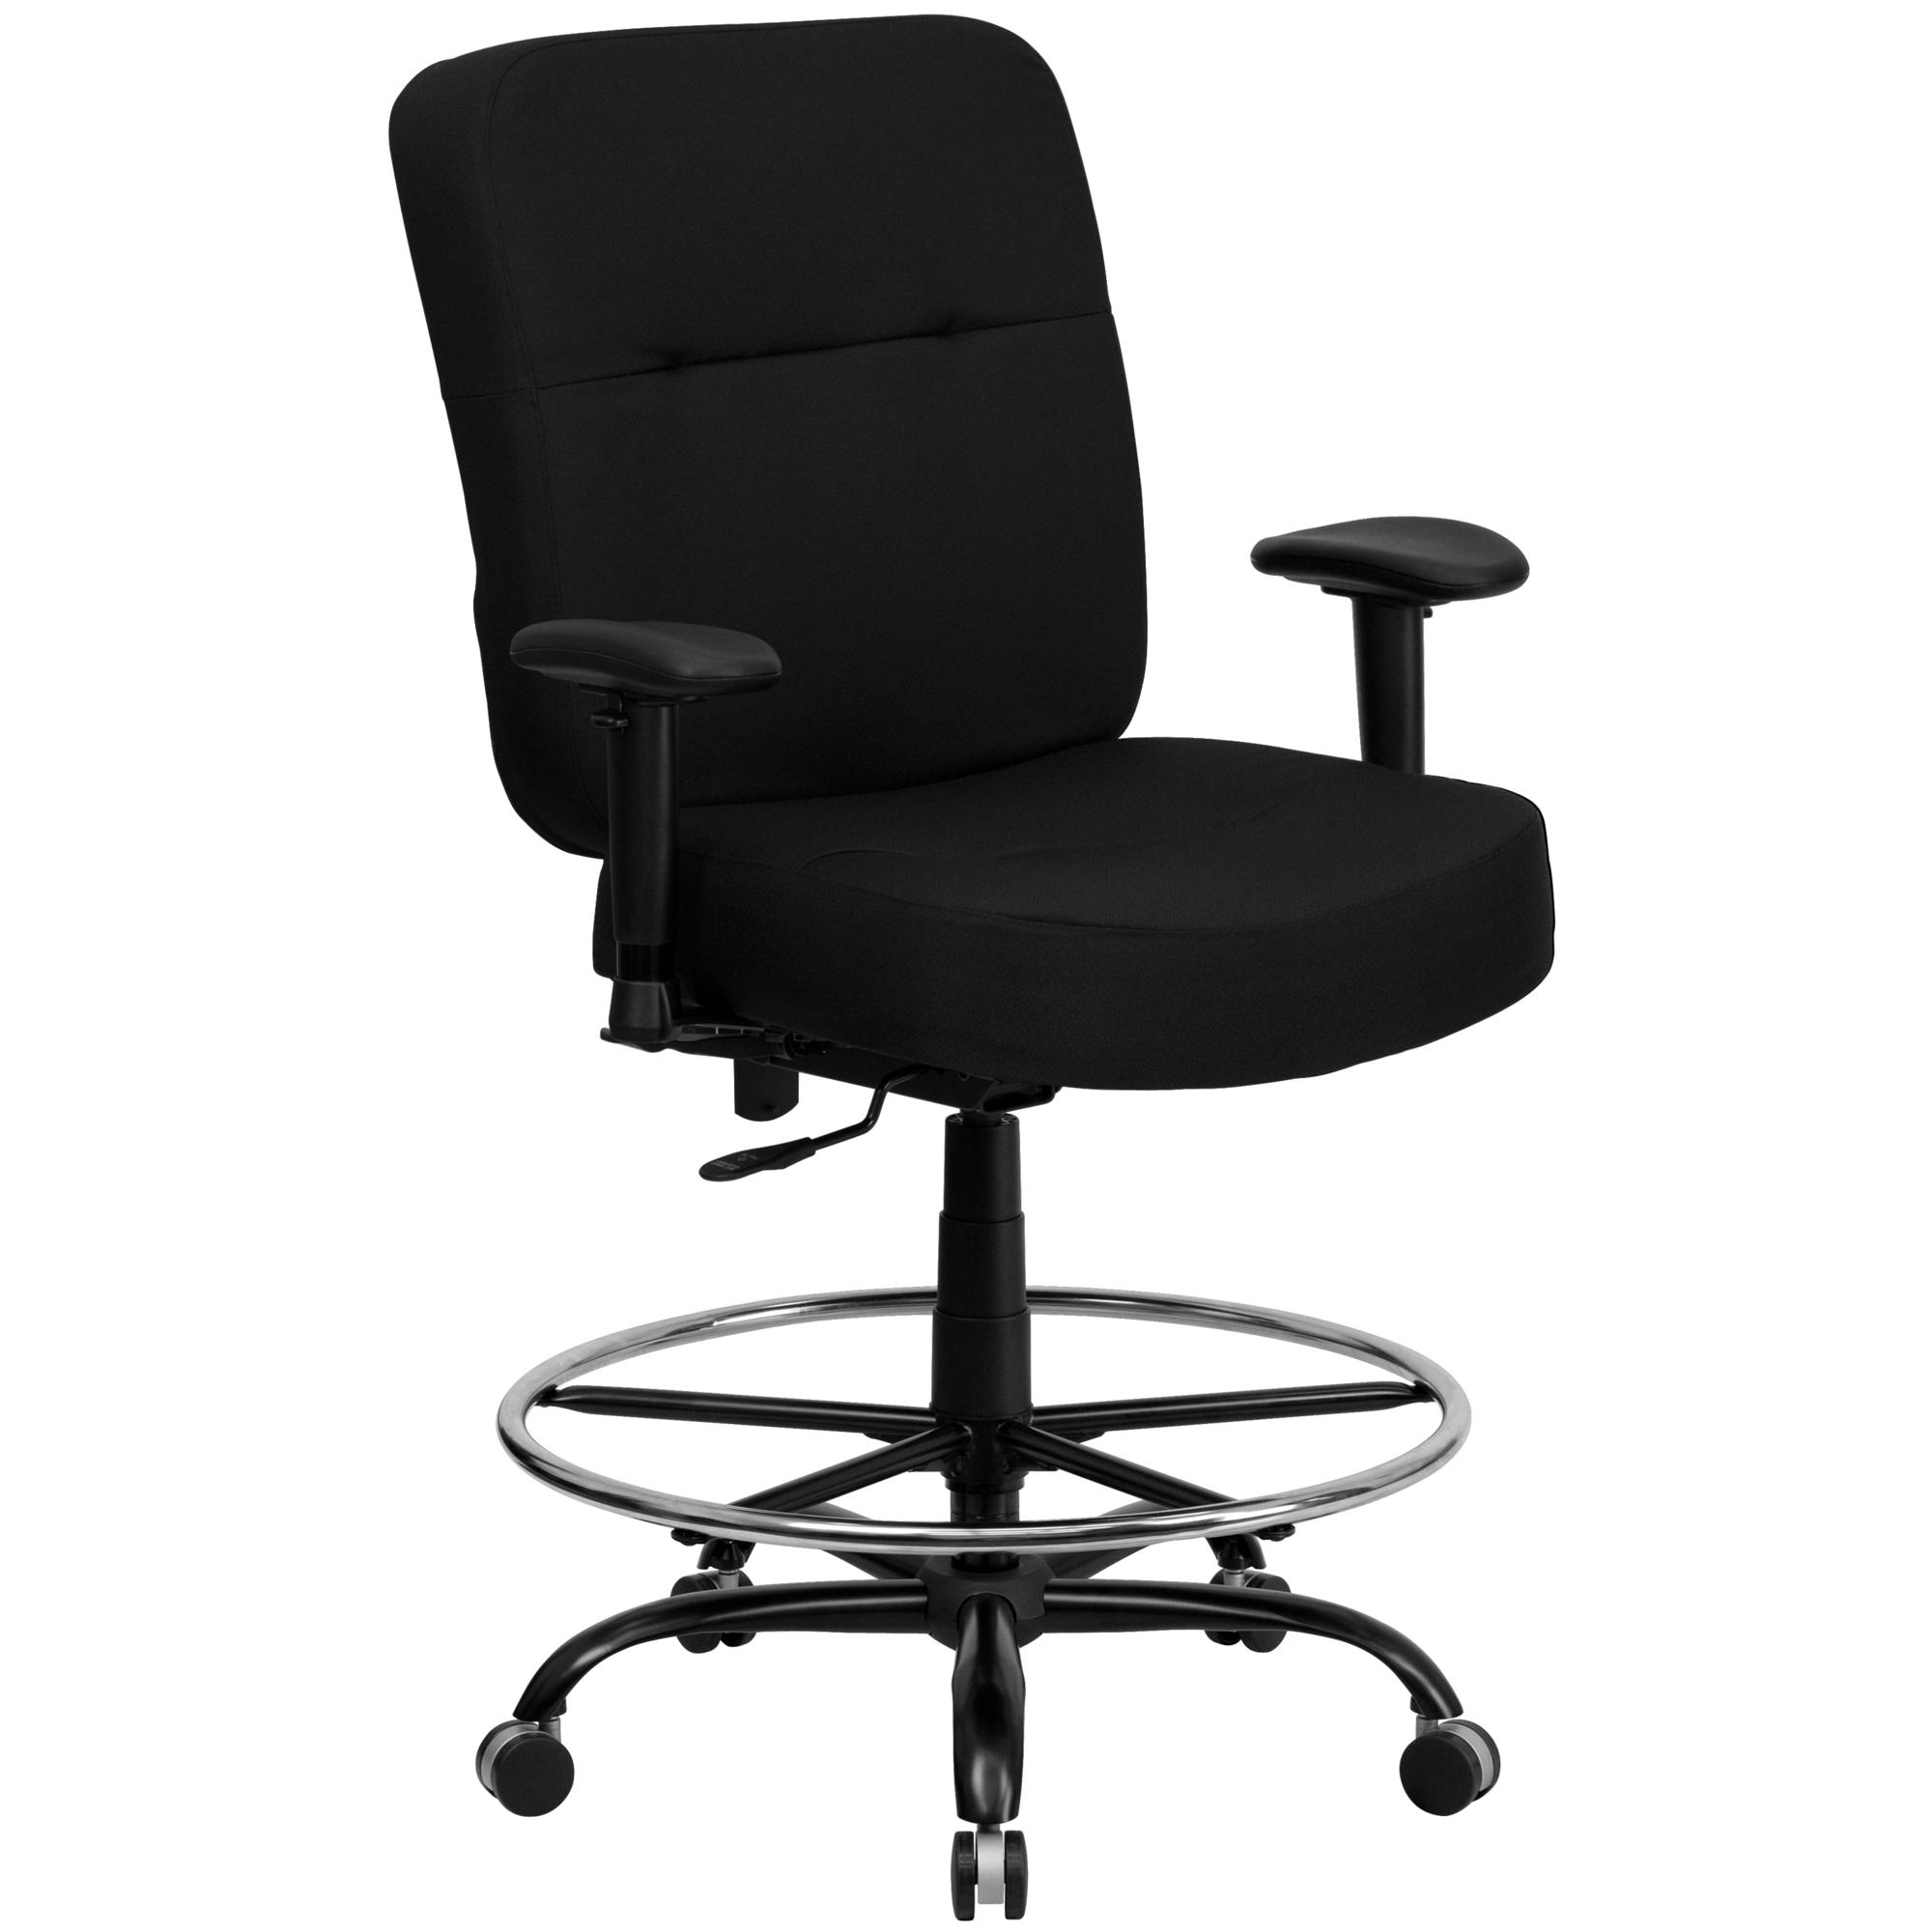 Flash Furniture, 400 lb. Rated High Back Black Fabric Draft Chair, Primary Color Black, Included (qty.) 1, Model WL735SYGBKAD